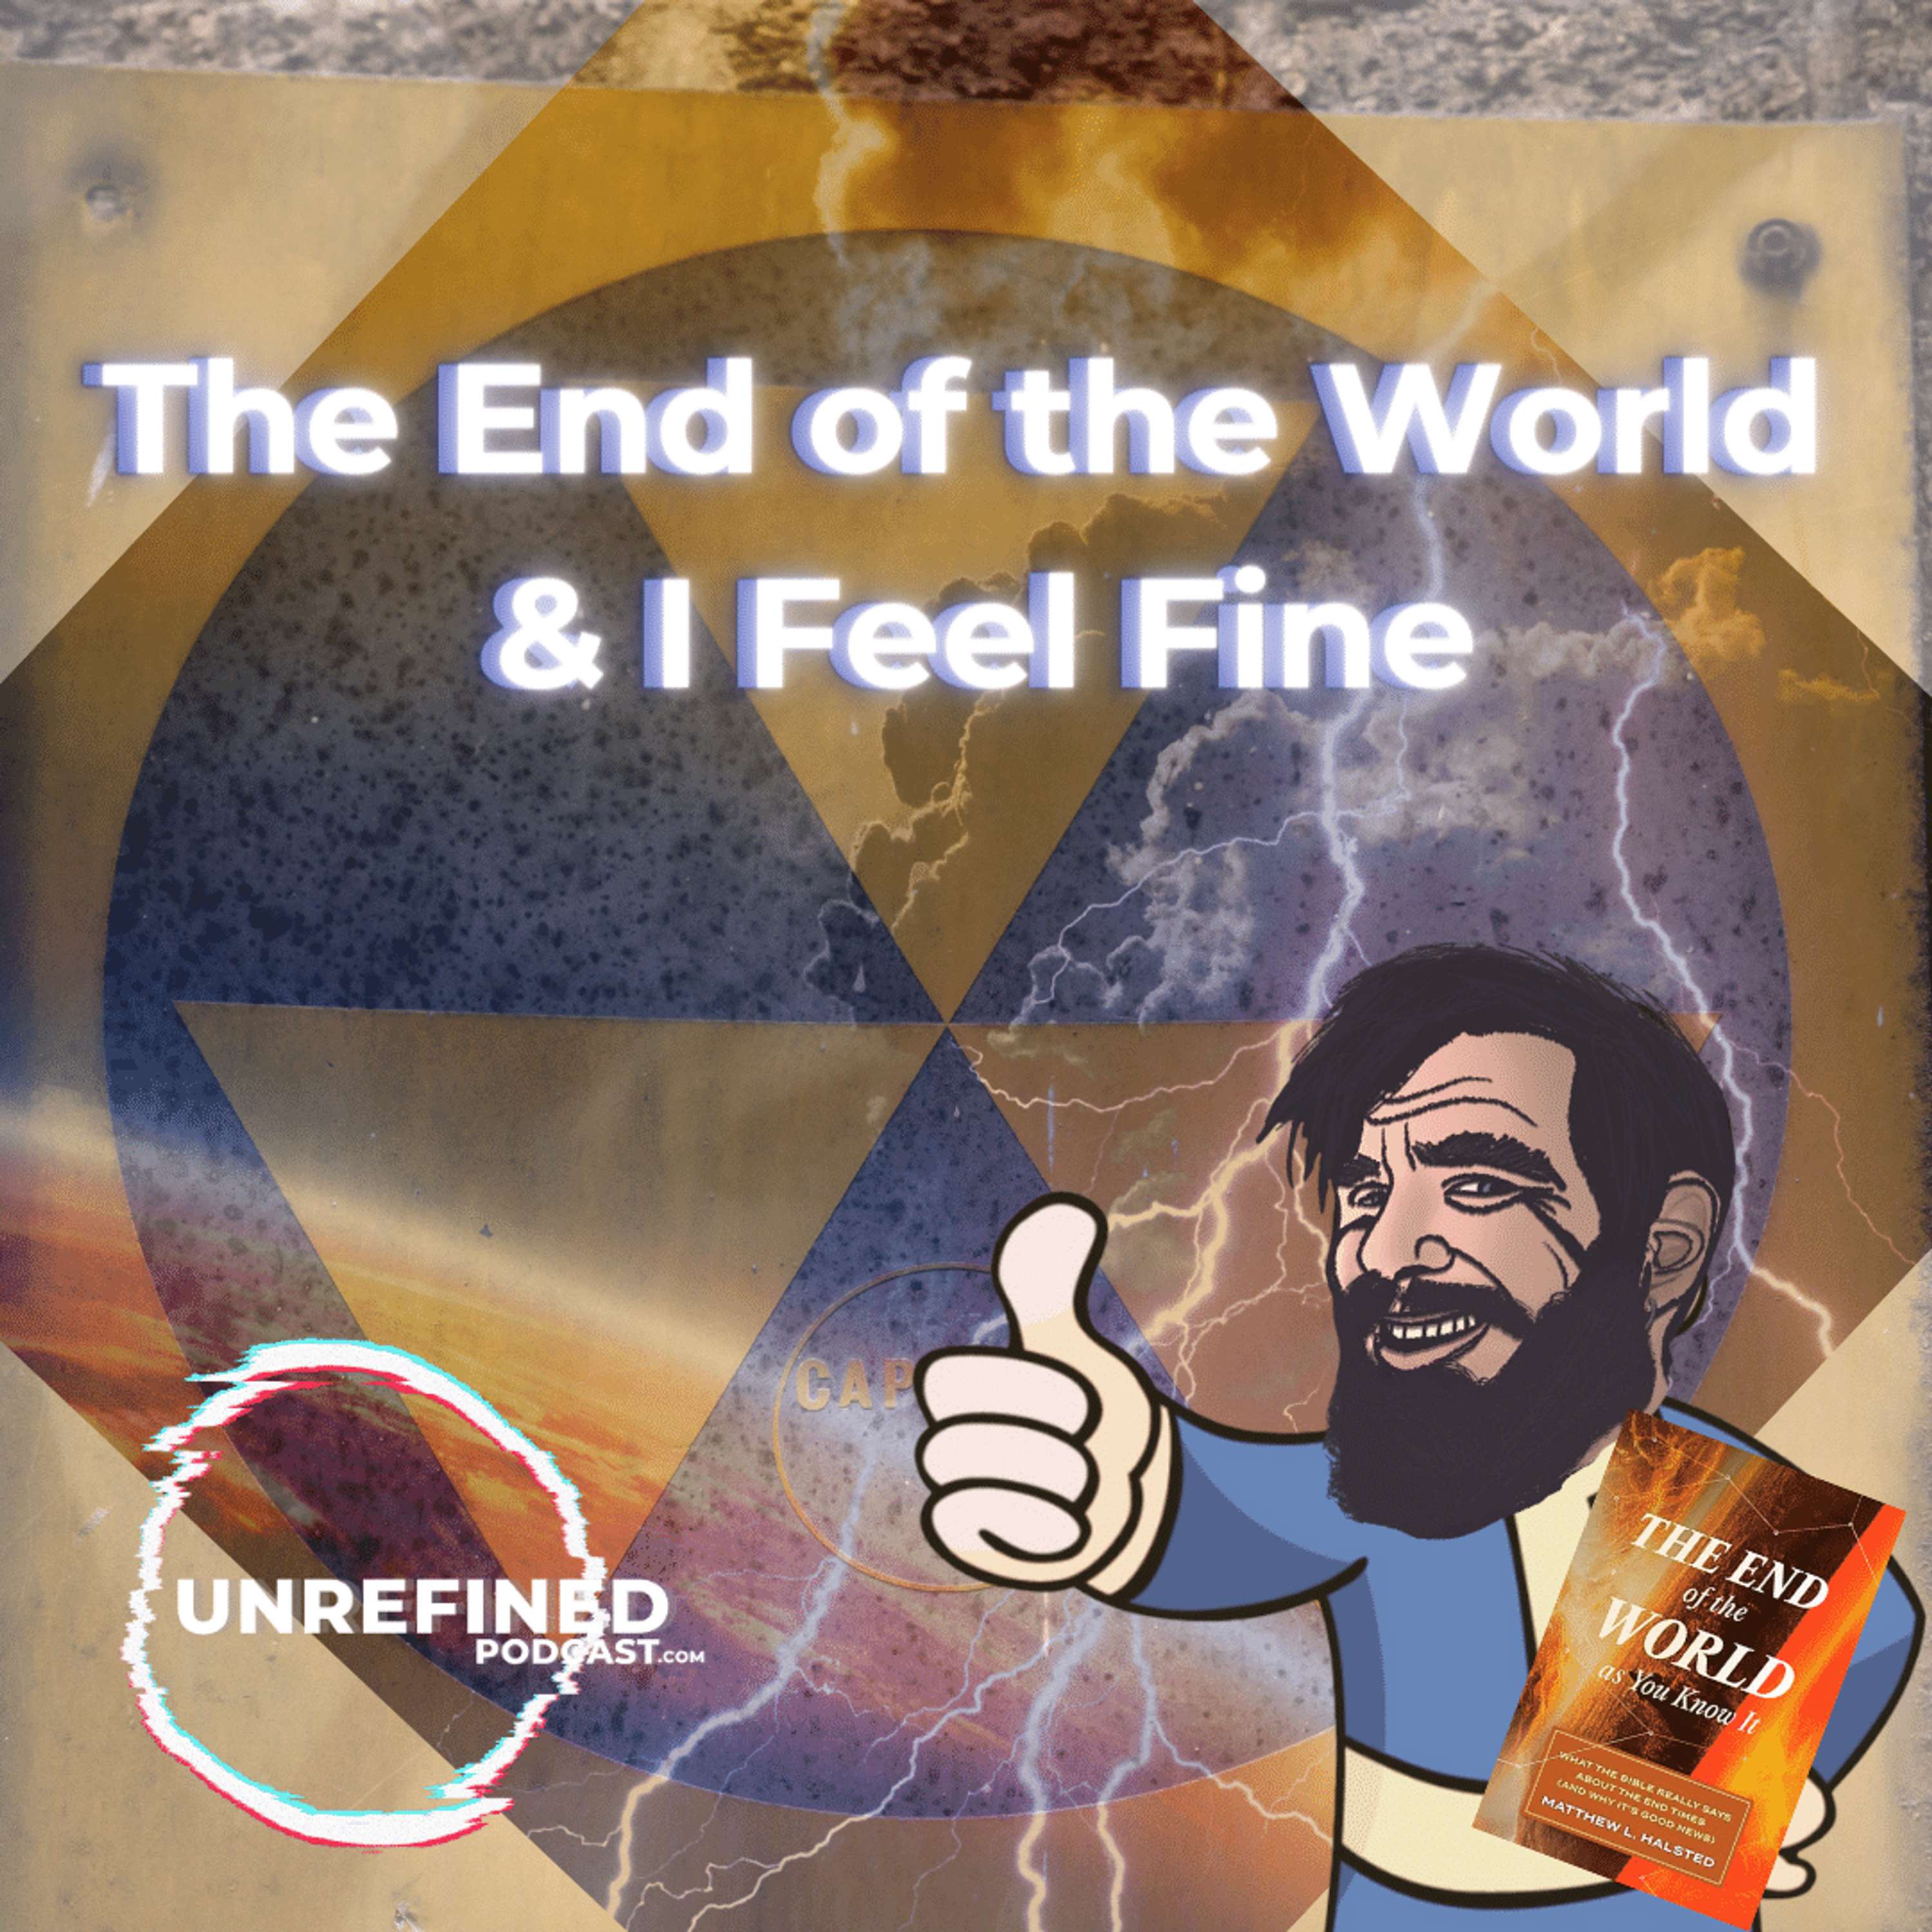 The End of the World & I Feel Fine